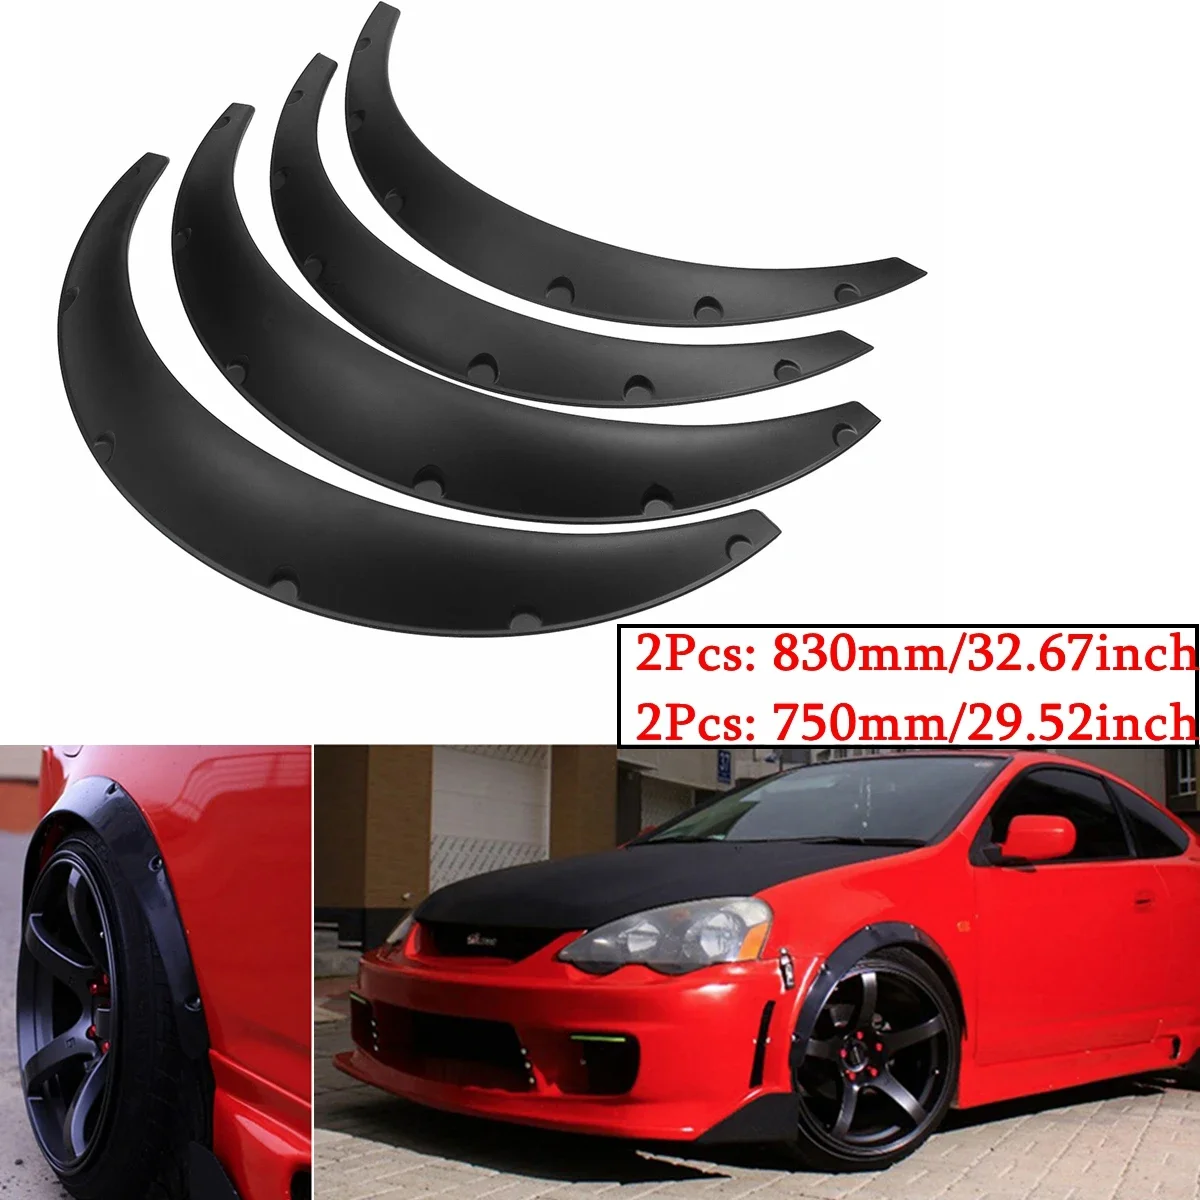 

Black Universal 4pcs Car Mudguard Mud Guard For Fender Flares Flexible Wheel Eyebrow Wheel Arches For Benz For BMW For Honda